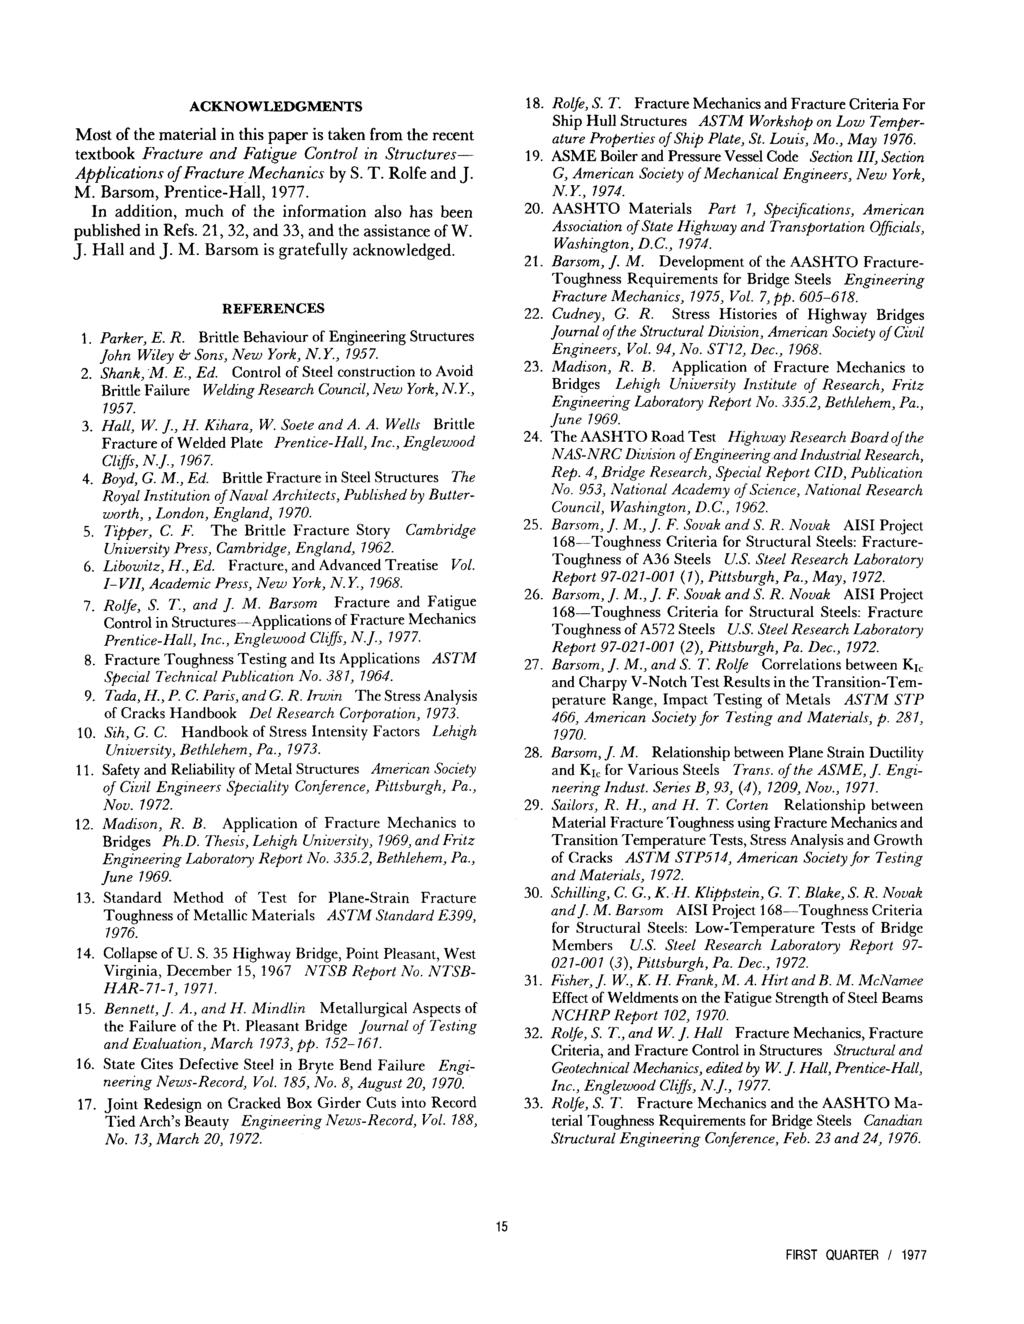 ACKNOWLEDGMENTS Most of the material in this paper is taken from the recent textbook Fracture and Fatigue Control in Structures Applications of Fracture Mechanics by S. T. Rolfe and J. M. Barsom, Prentice-Hall, 1977.